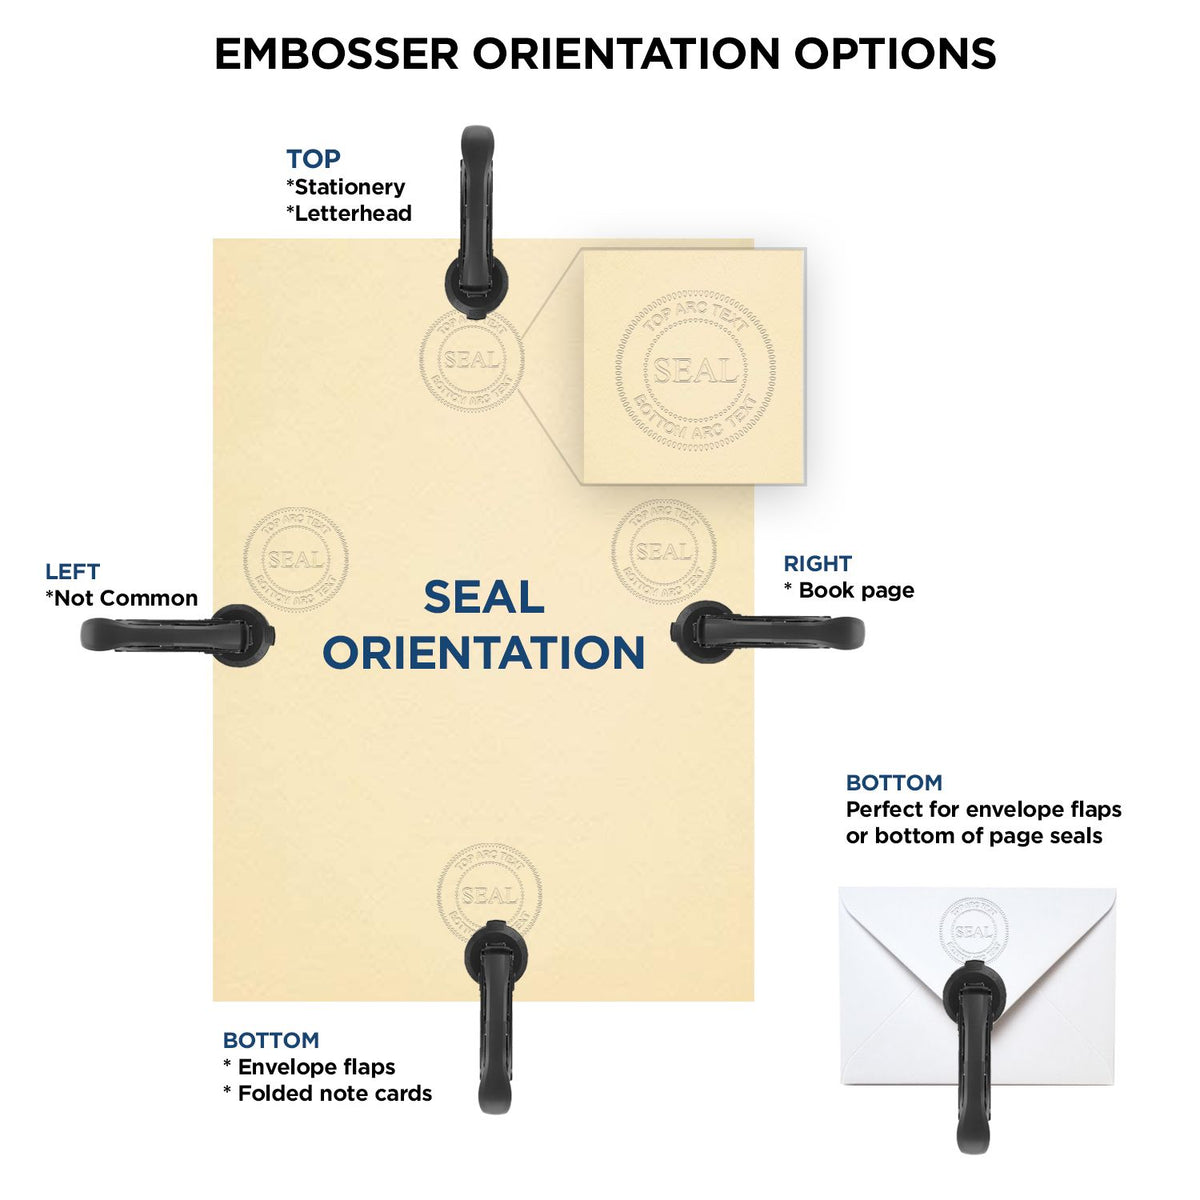 An infographic for the State of Georgia Soft Land Surveyor Embossing Seal showing embosser orientation, this is showing examples of a top, bottom, right and left insert.